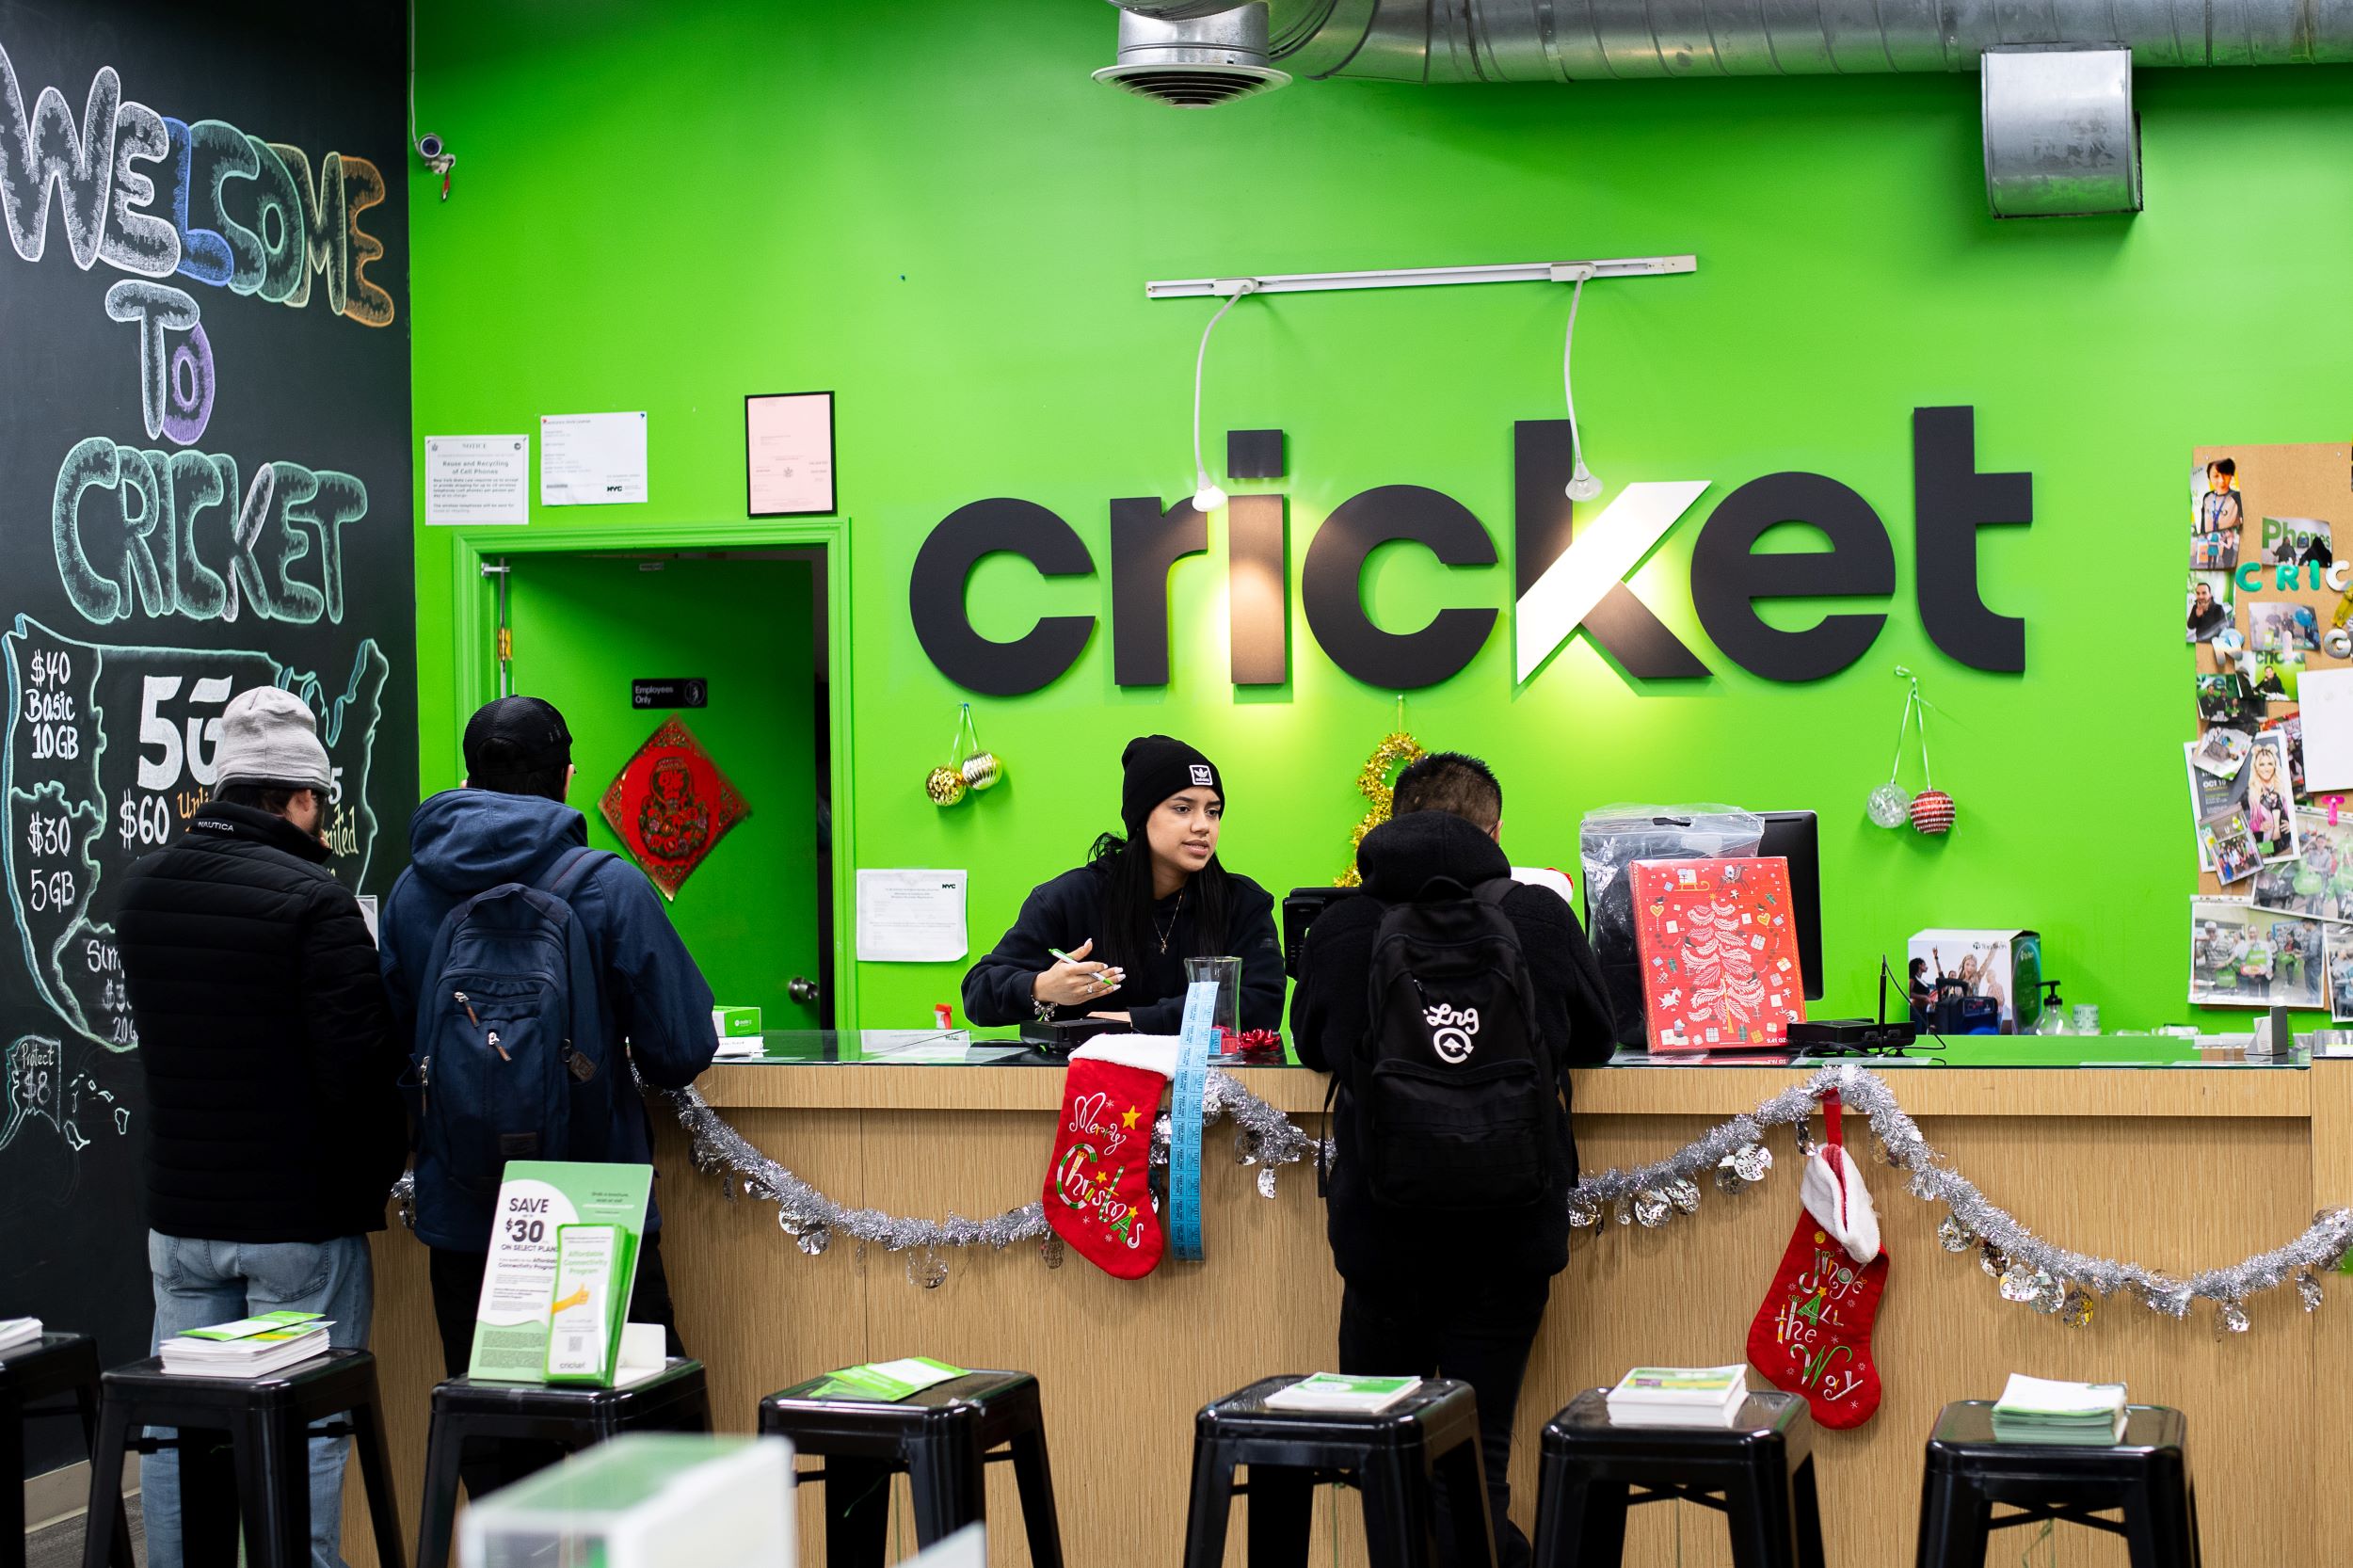 Customers interact with an employee at a cricket store counter, decorated with holiday ornaments and stockings, under a bright green wall with the cricket logo.